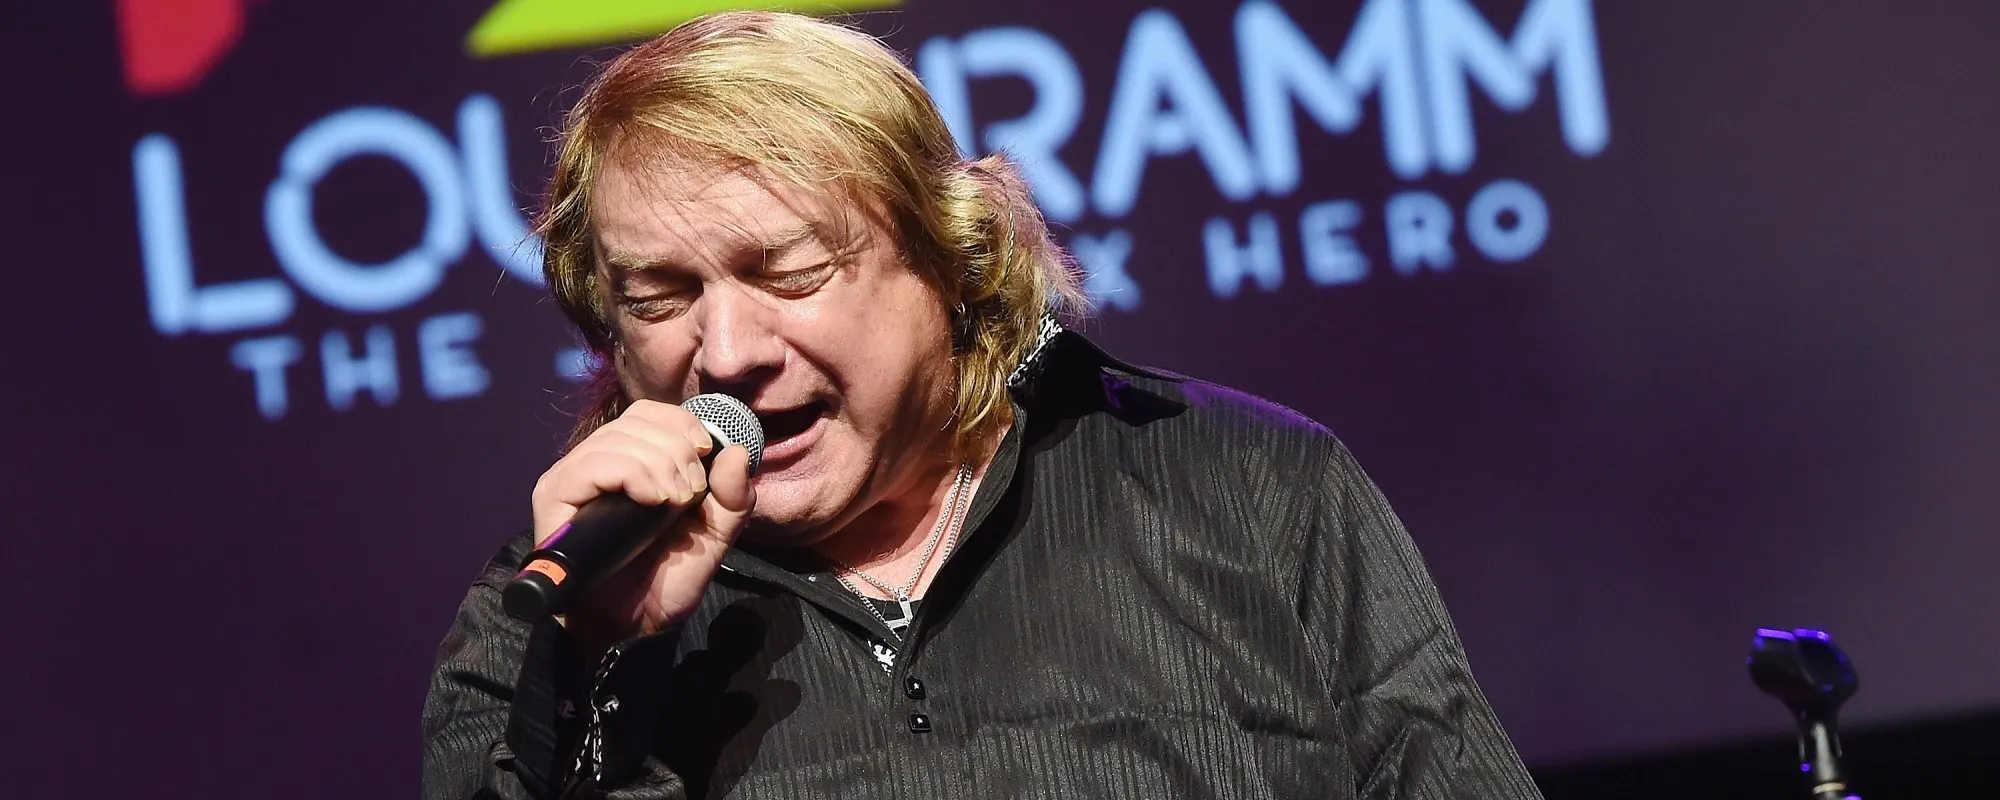 Ex-Foreigner Singer Lou Gramm on Paul McCartney’s NSFW Video Supporting Band’s Rock Hall Induction: “[It] Was Awesome”